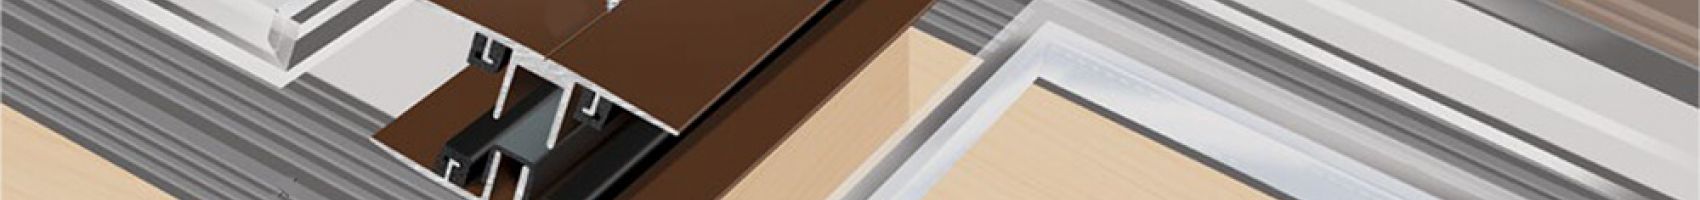 Self Supporting Horizontal Glazing Bar for 16-24mm Double Glaze Units 3m Brown